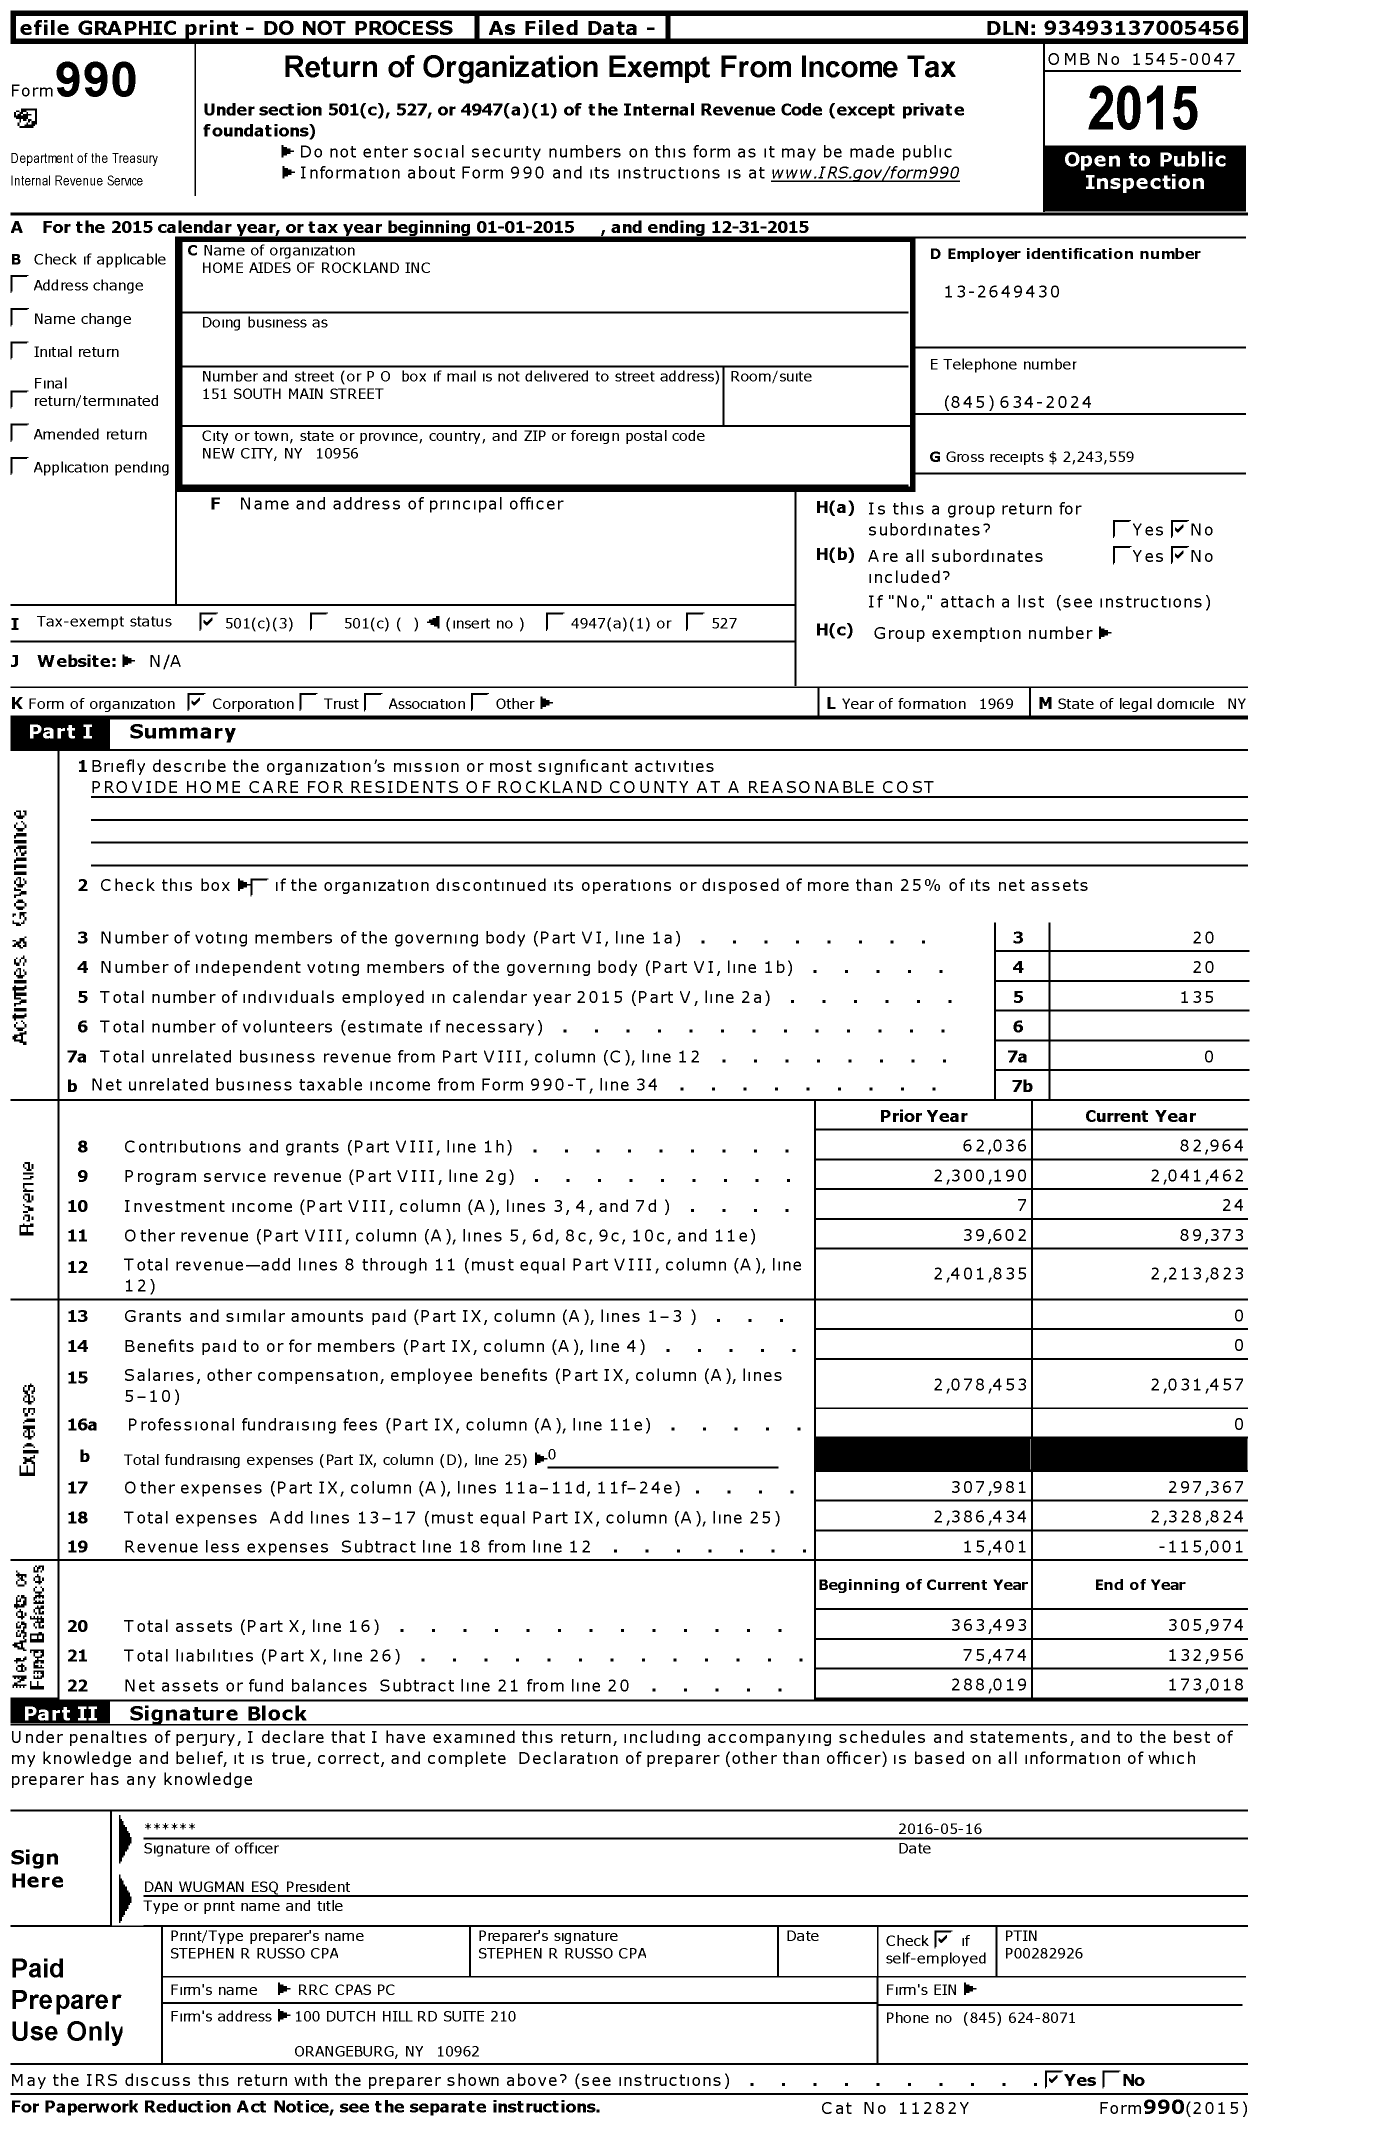 Image of first page of 2015 Form 990 for Home Health Care Agencies.com